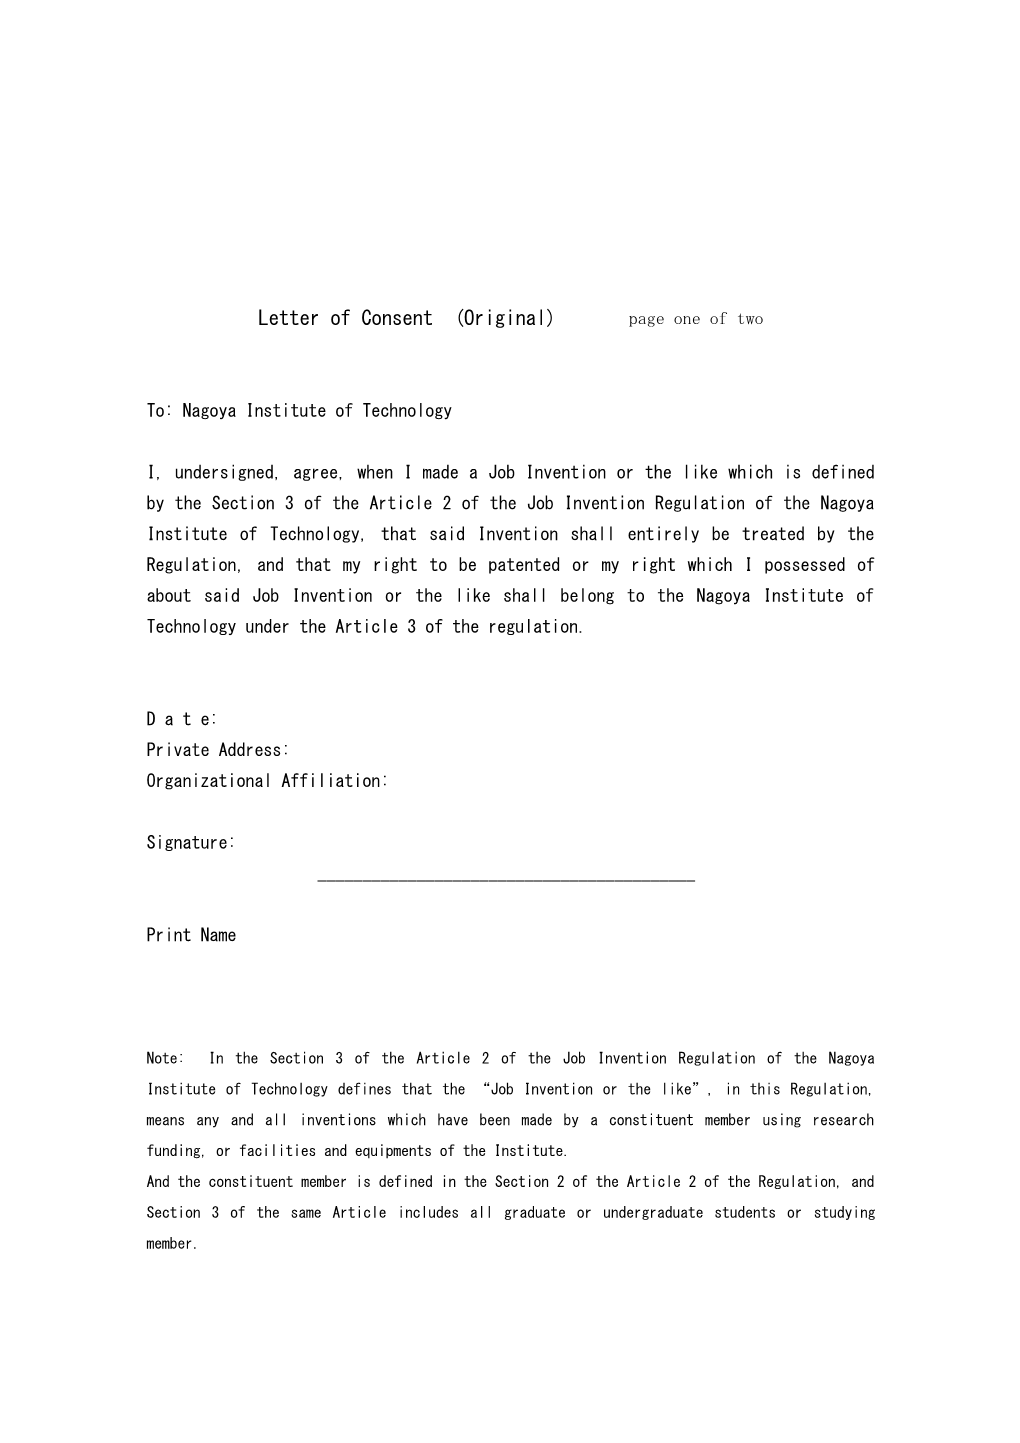 Letter of Consent (Original) Page One of Two